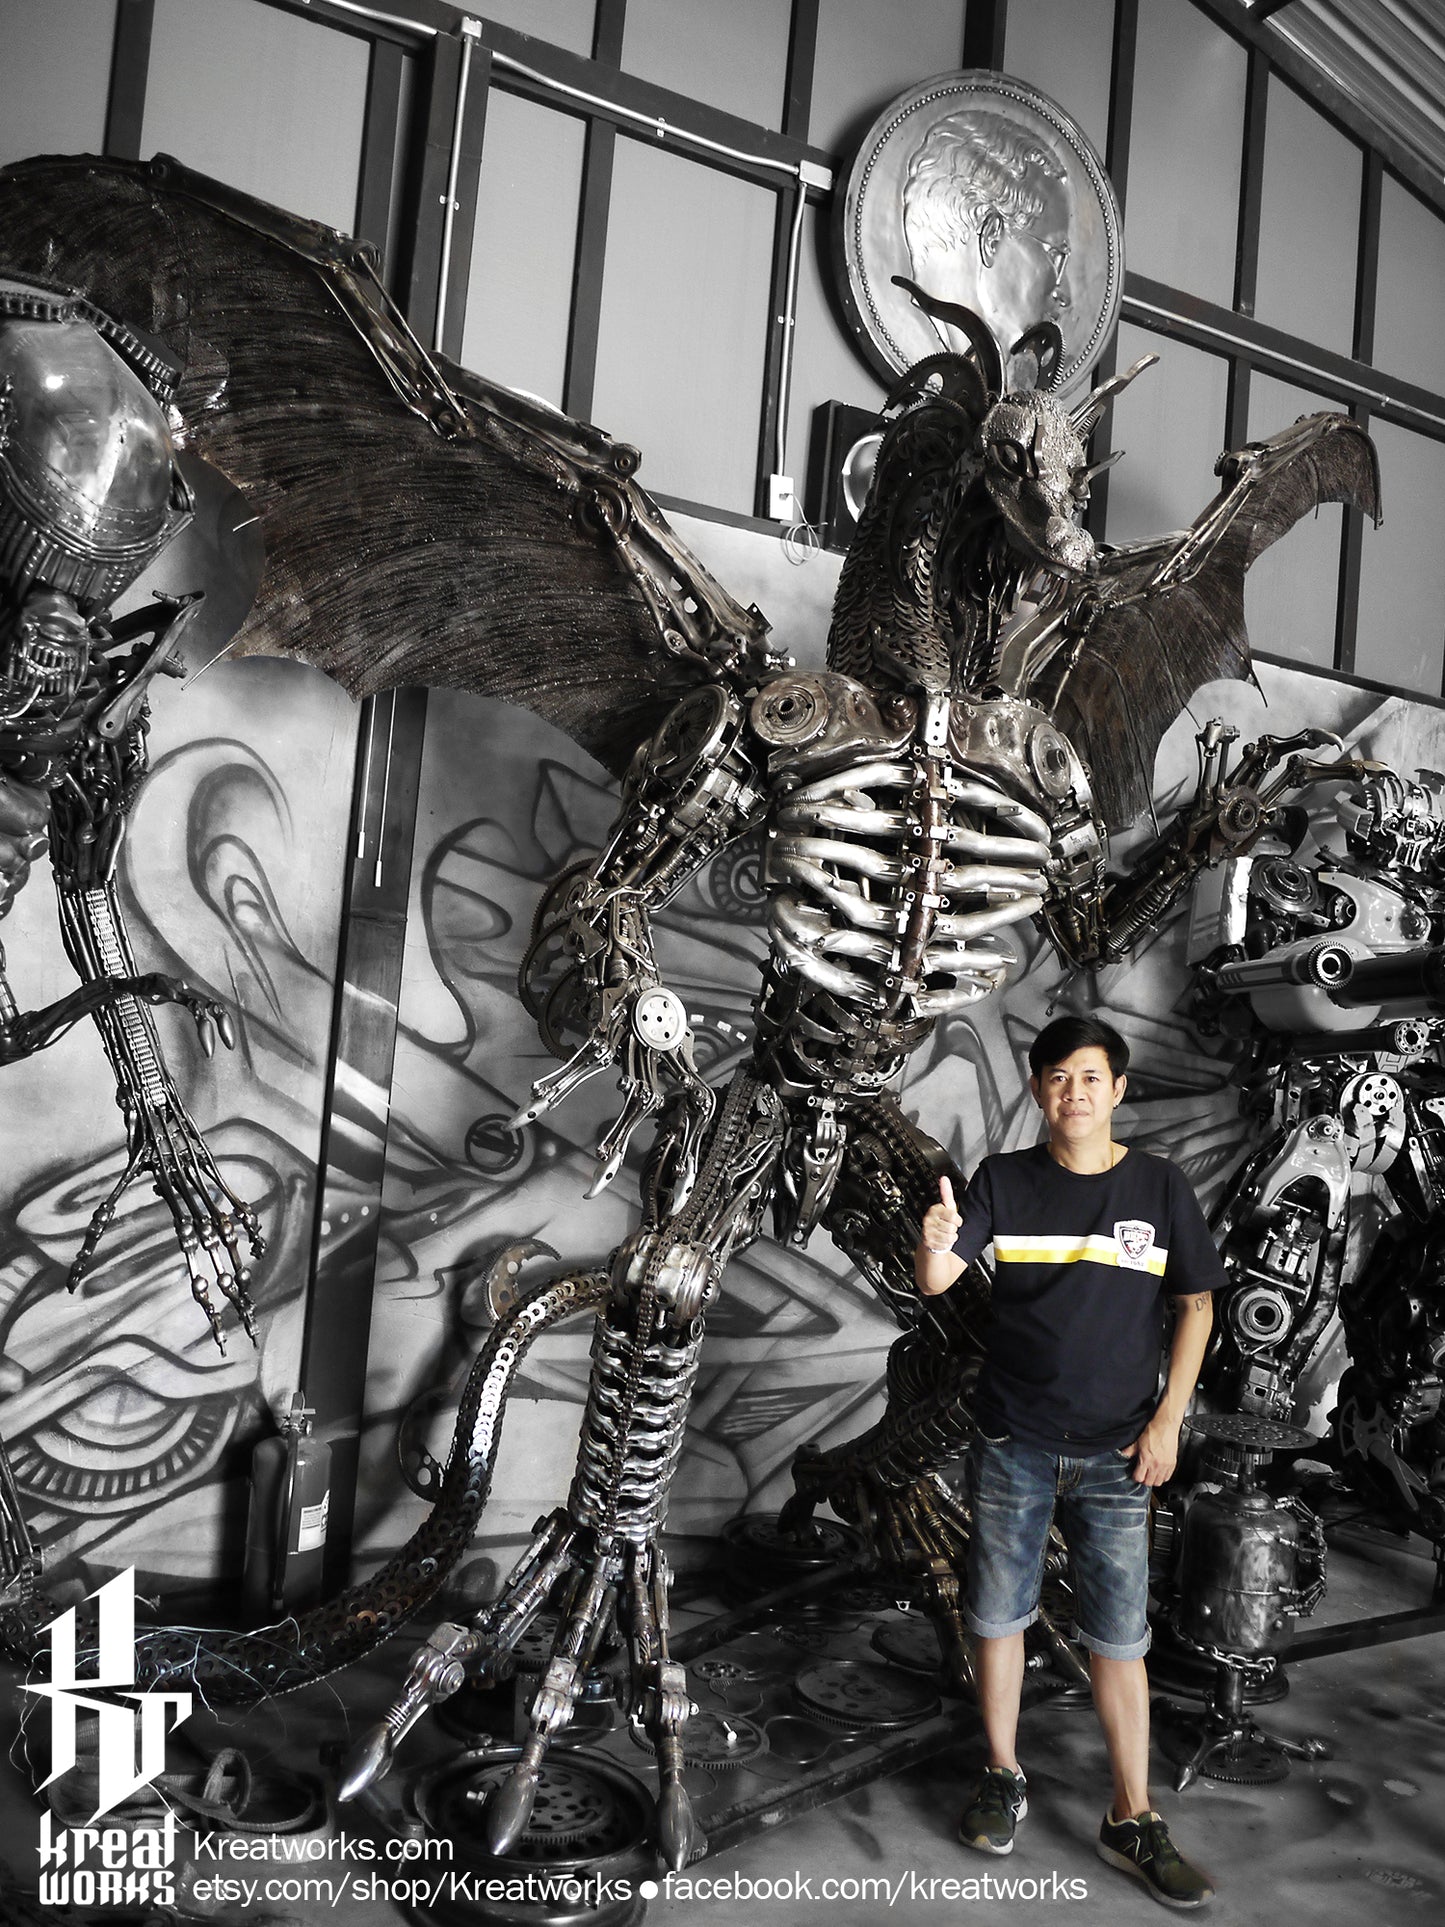 Recycled Metal Cruel Giant Dragon (3 m height) : Made to order / Recycle Metal Sustainable Sculpture Art